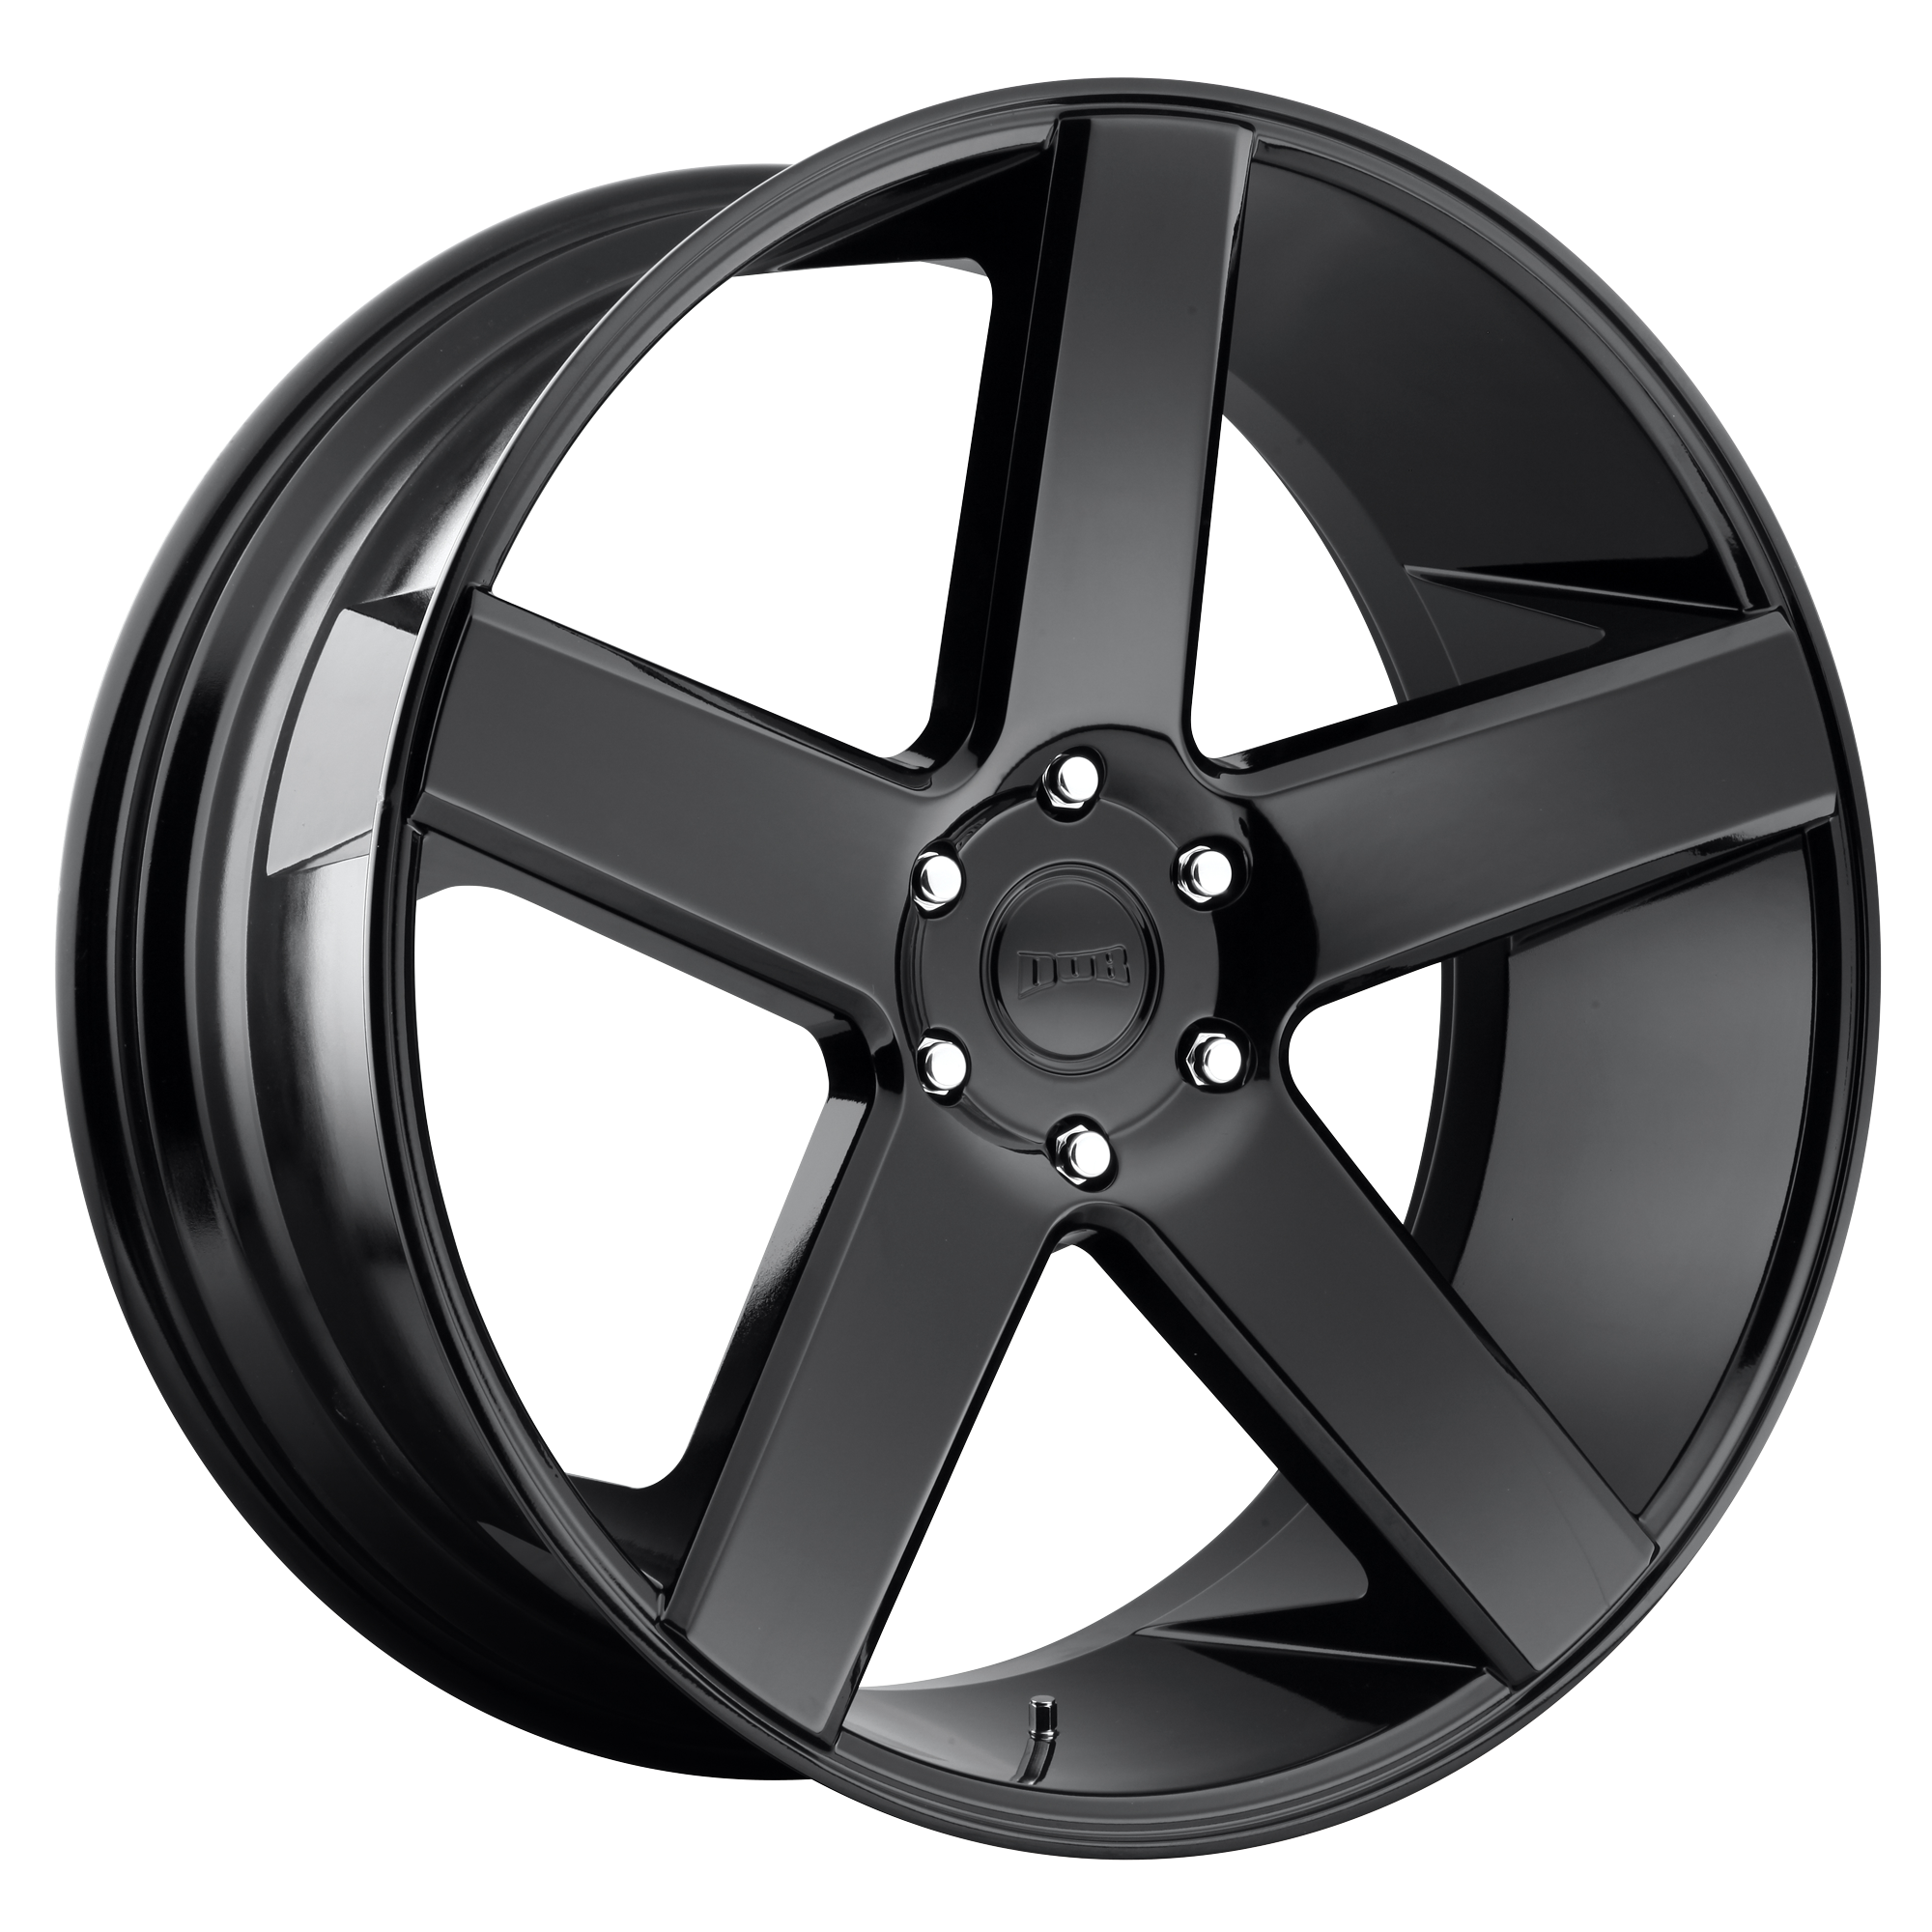 BALLER 22x9 5x115.00 GLOSS BLACK (15 mm) - Tires and Engine Performance